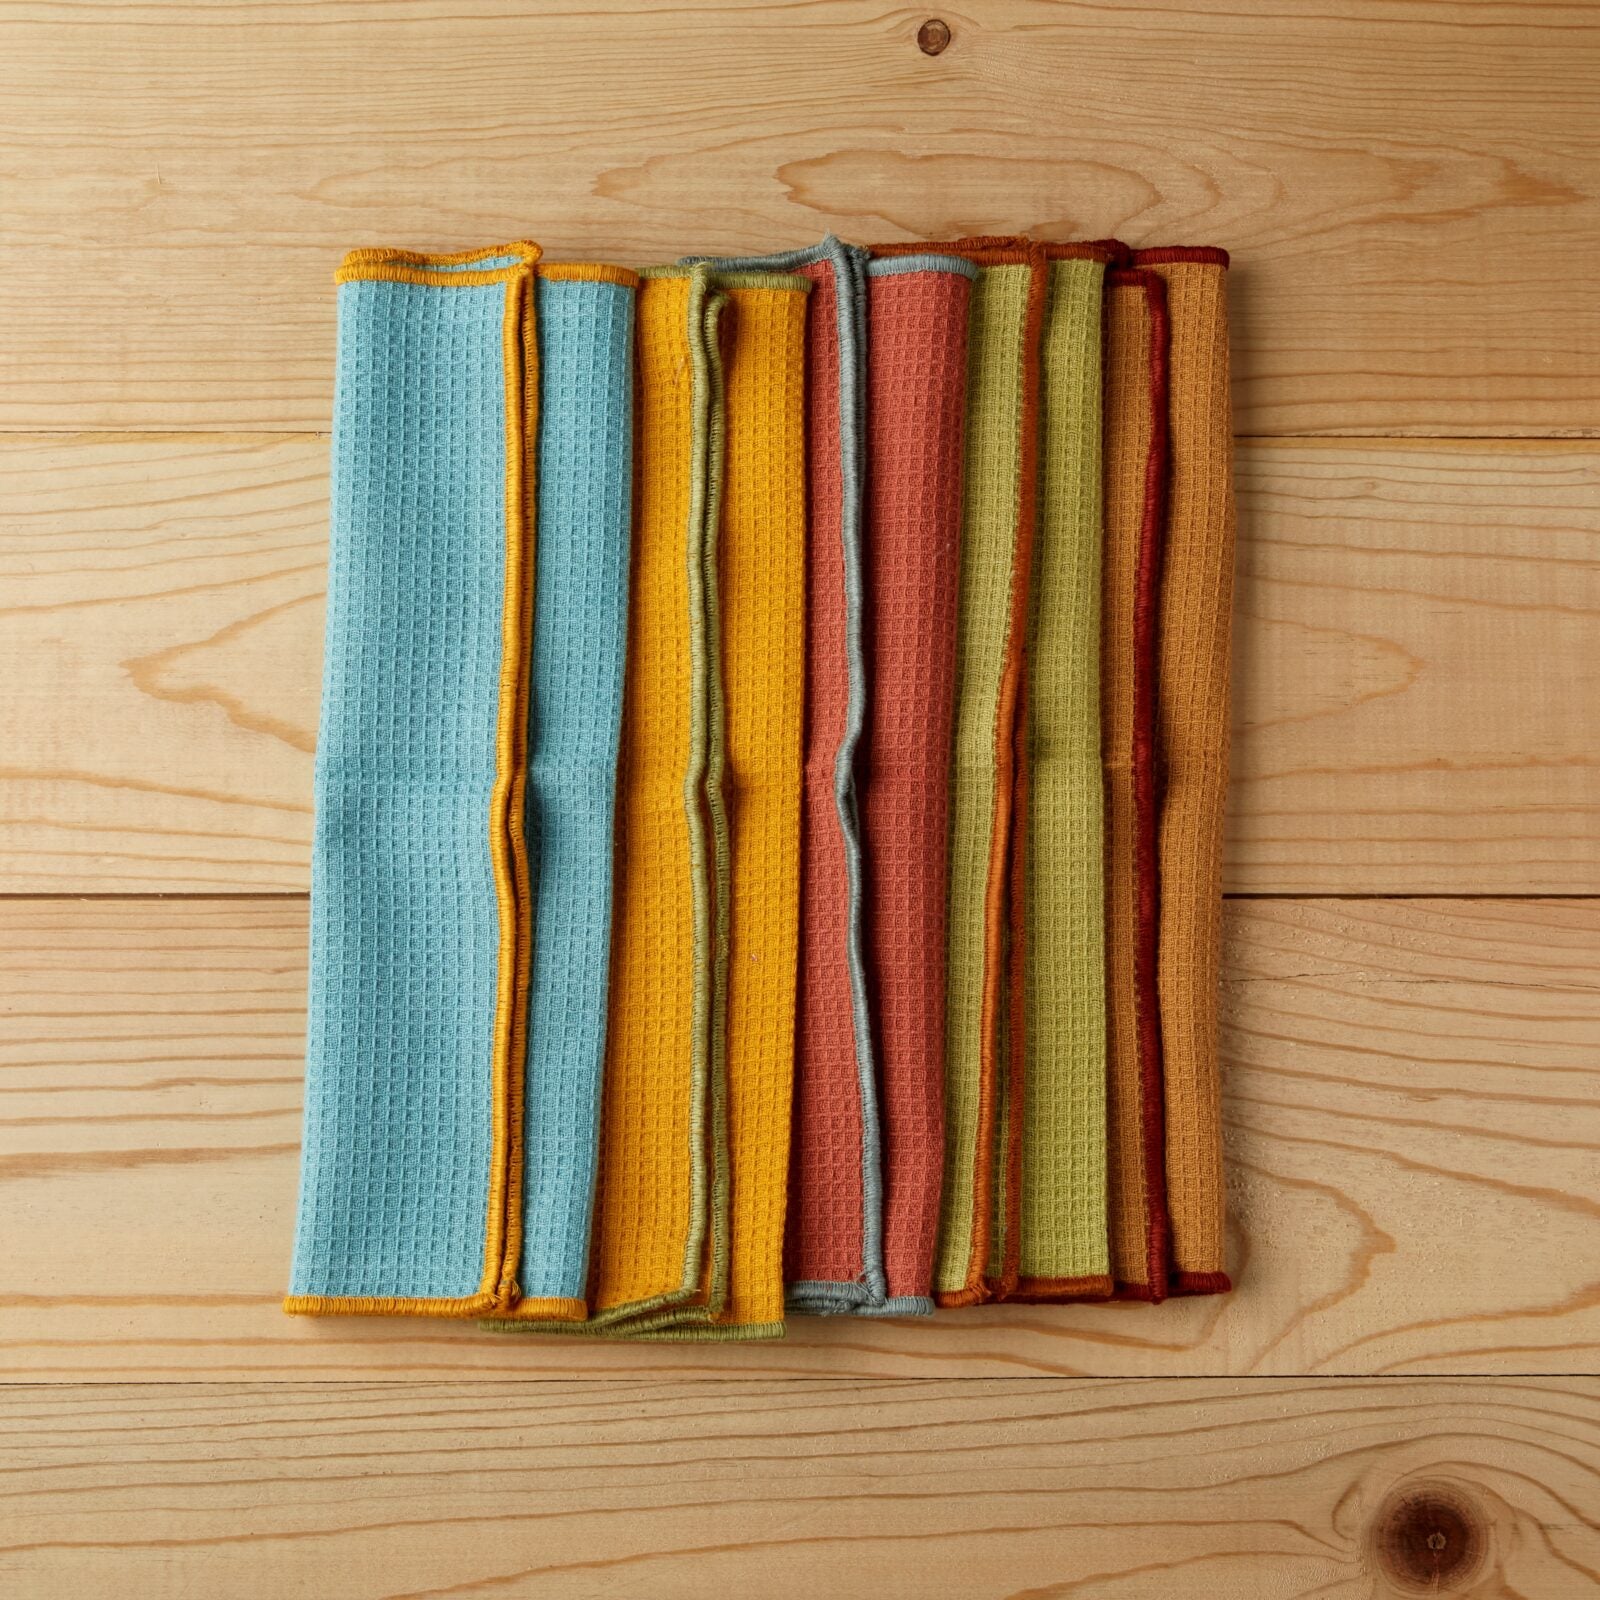 Harlow Bright Dish Towels Assorted Set of 5